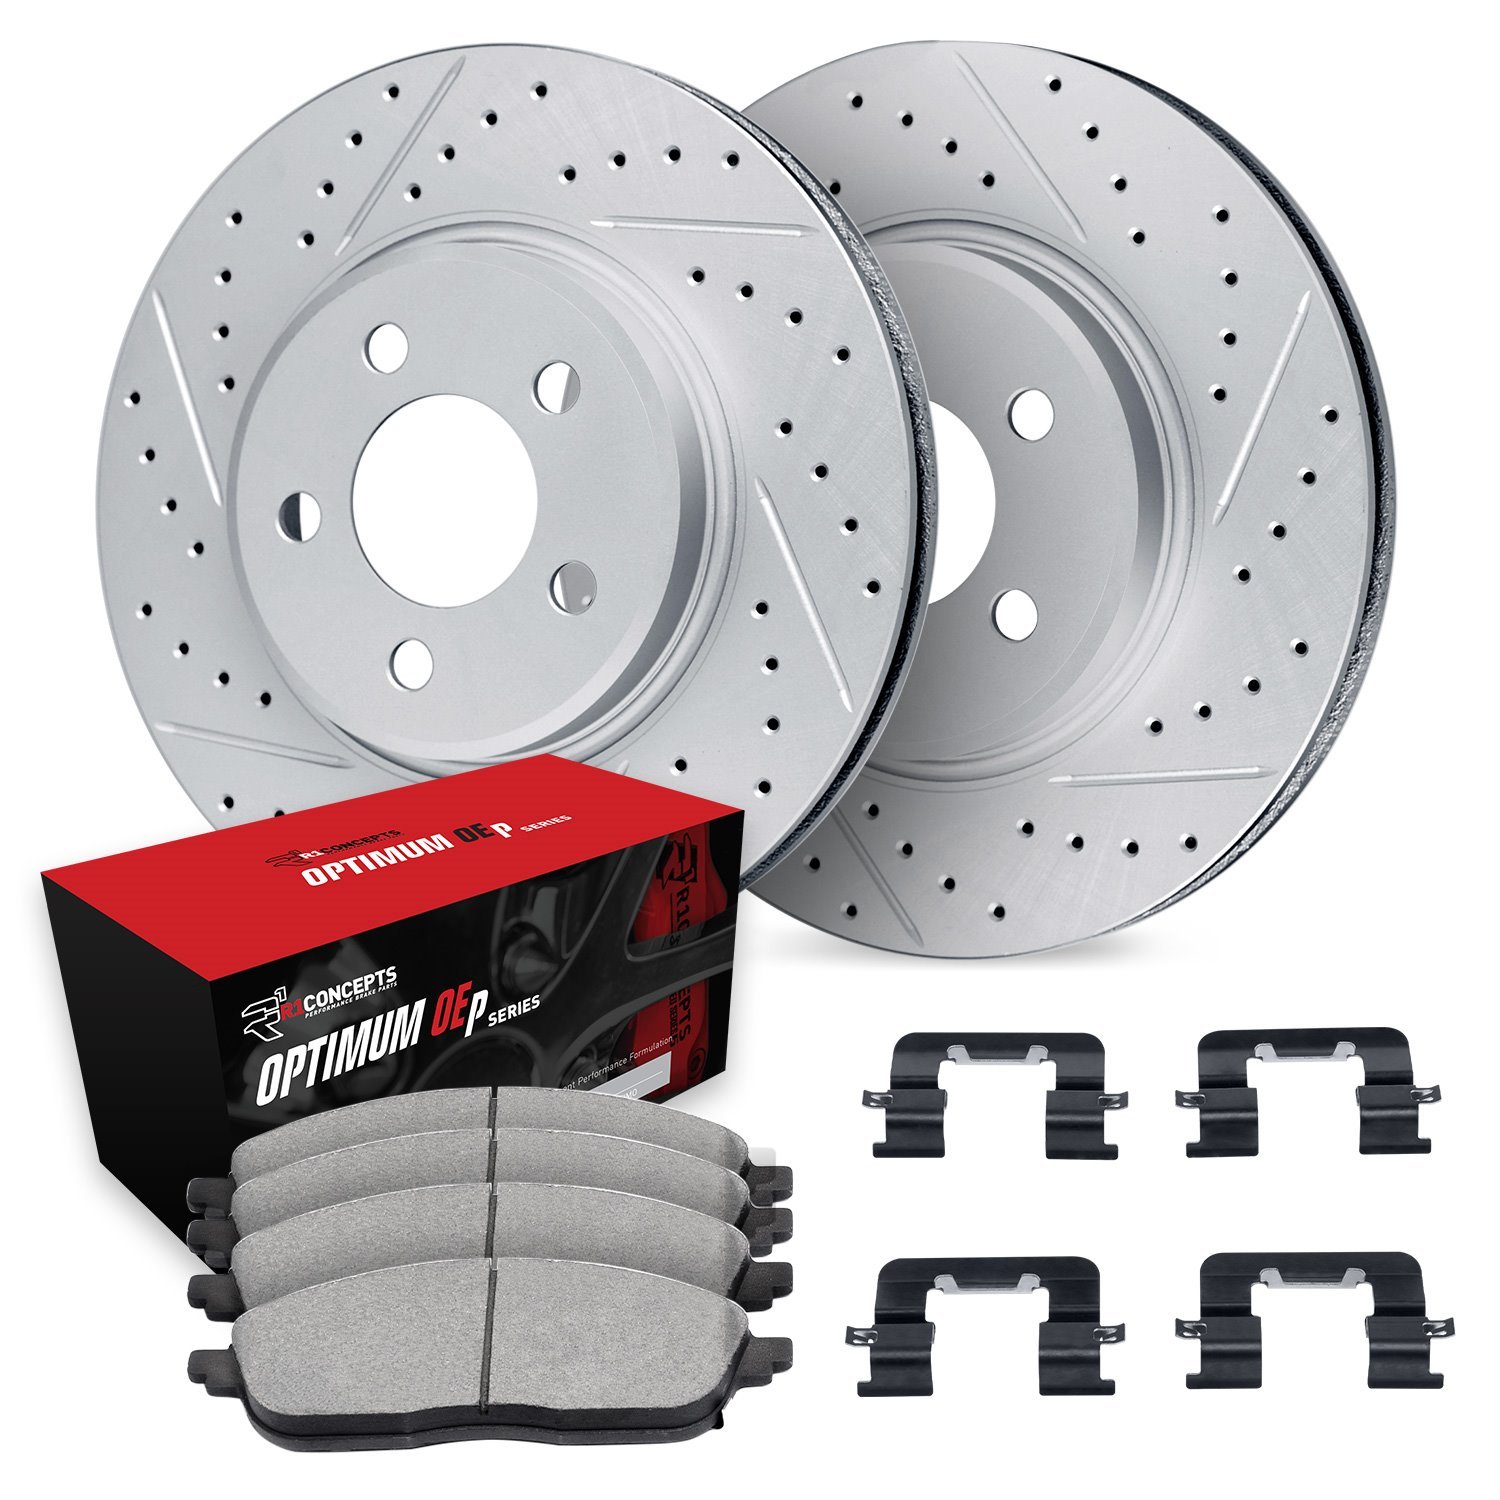 GEO-Carbon Drilled & Slotted Brake Rotor Set w/Optimum OE Pads & Hardware, Fits Select GM, Position: Front